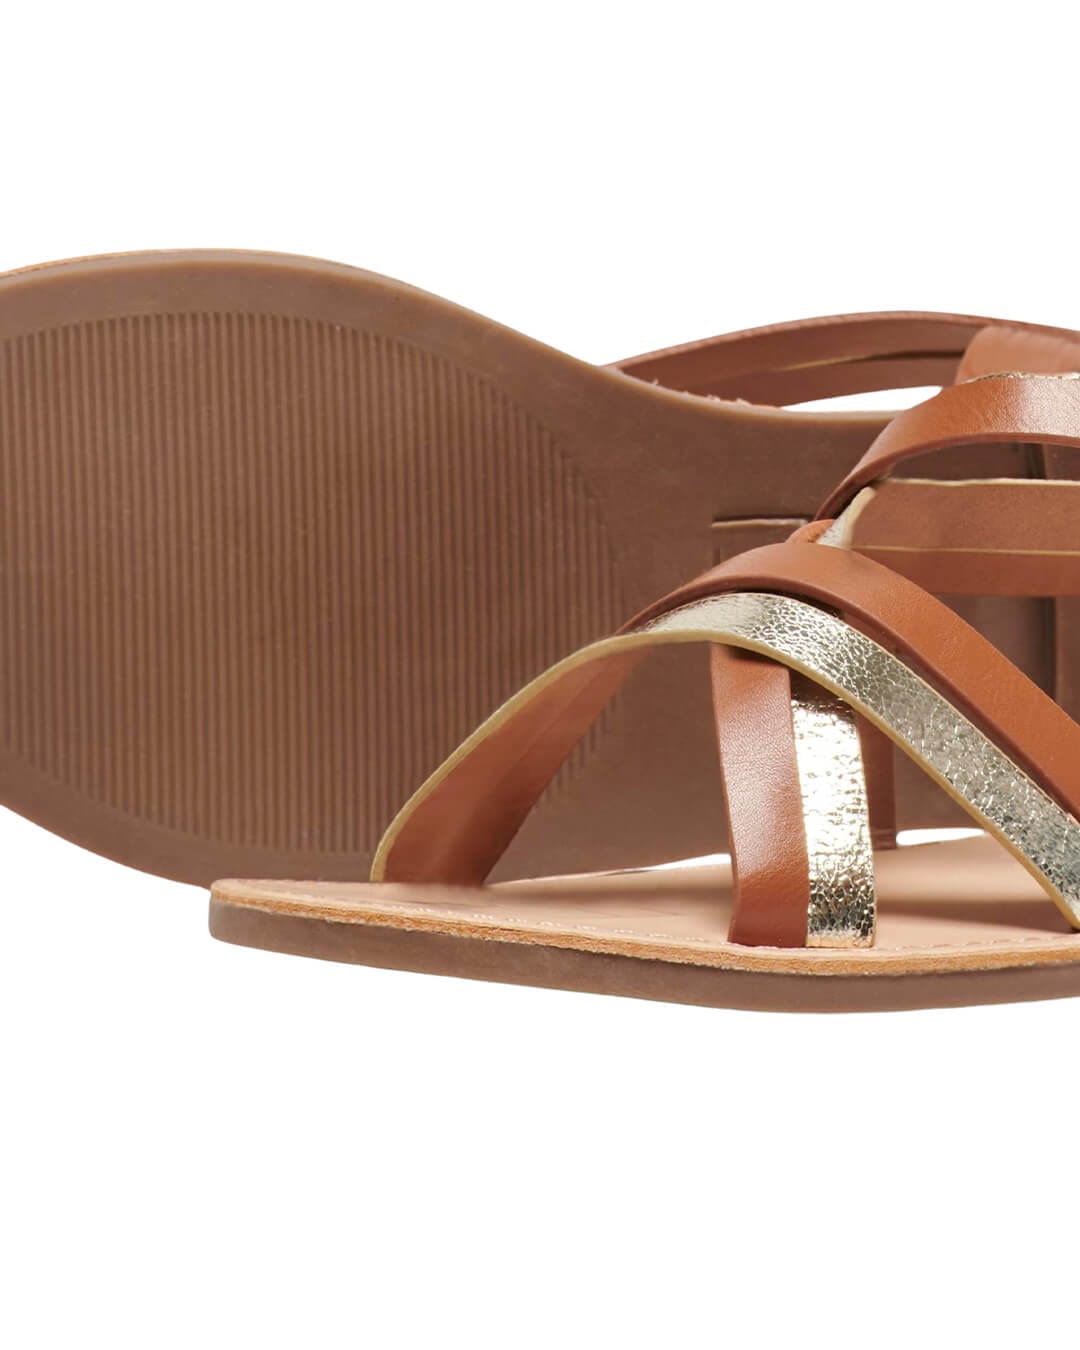 Only Shoes Only Brown Mandala Strap Sandals